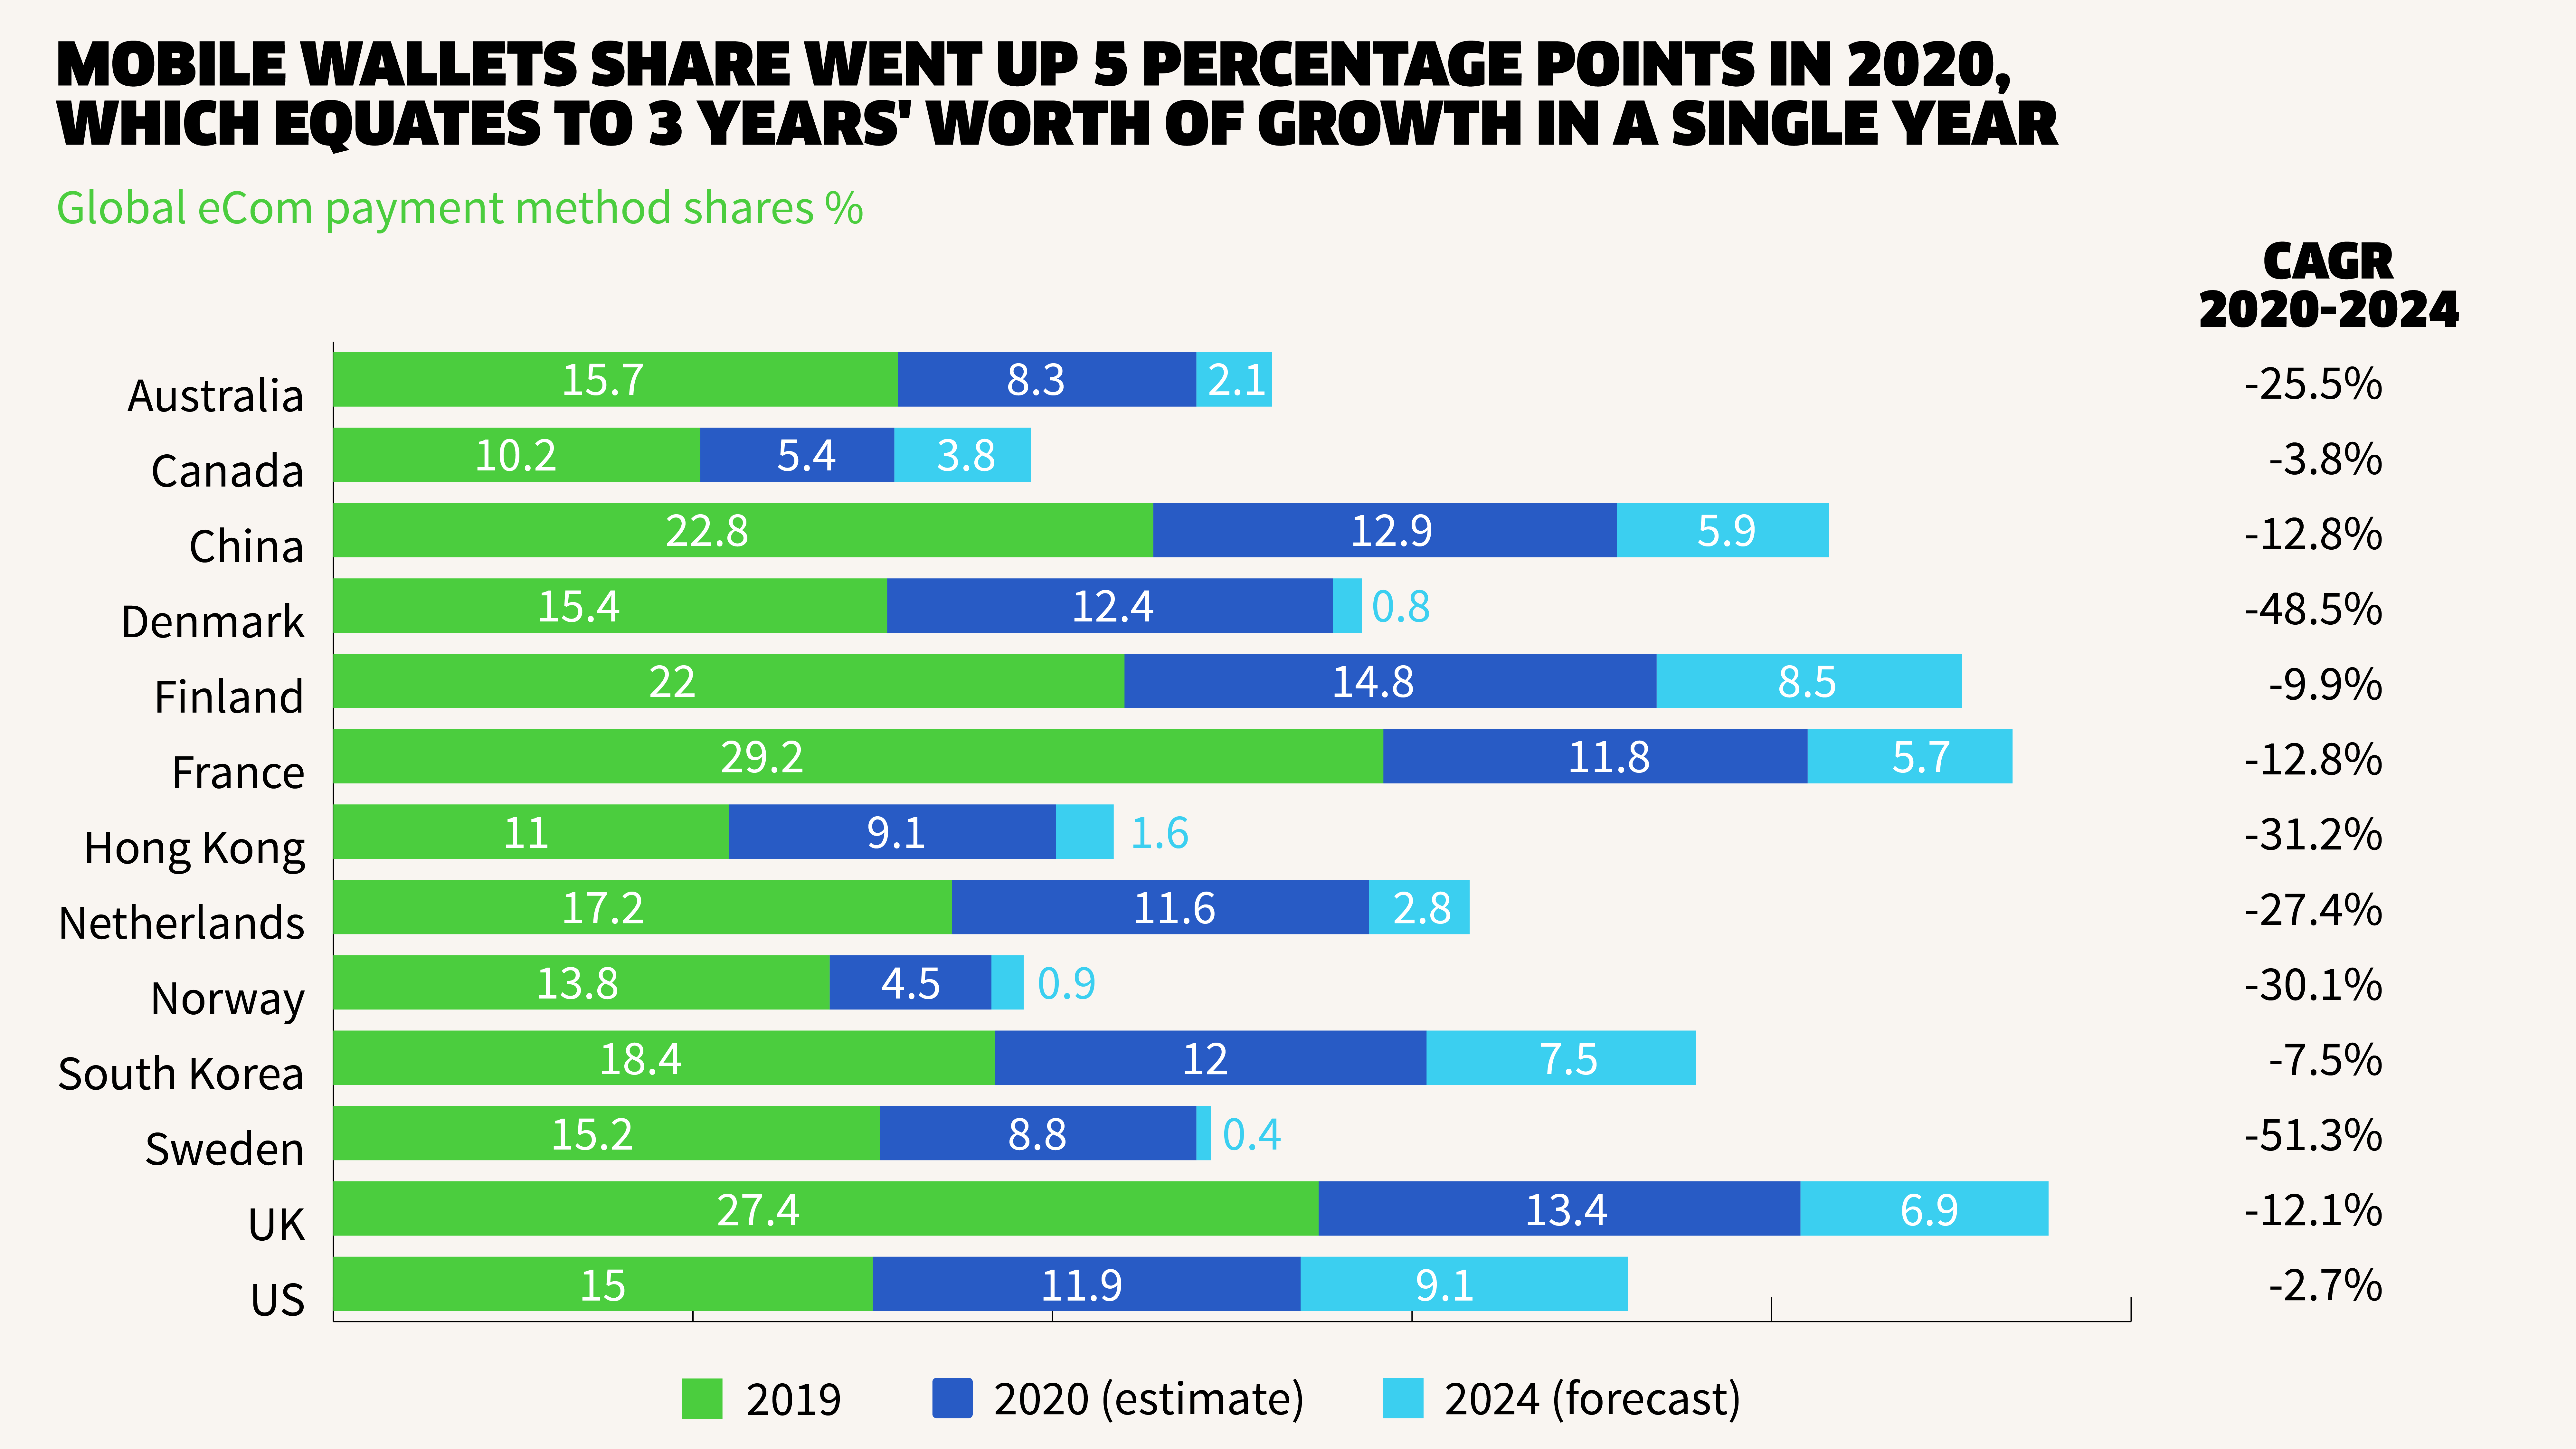 Mobile wallets share went up 5 percentage points in 2020, which equates to 3 years' worth of growth in a single year